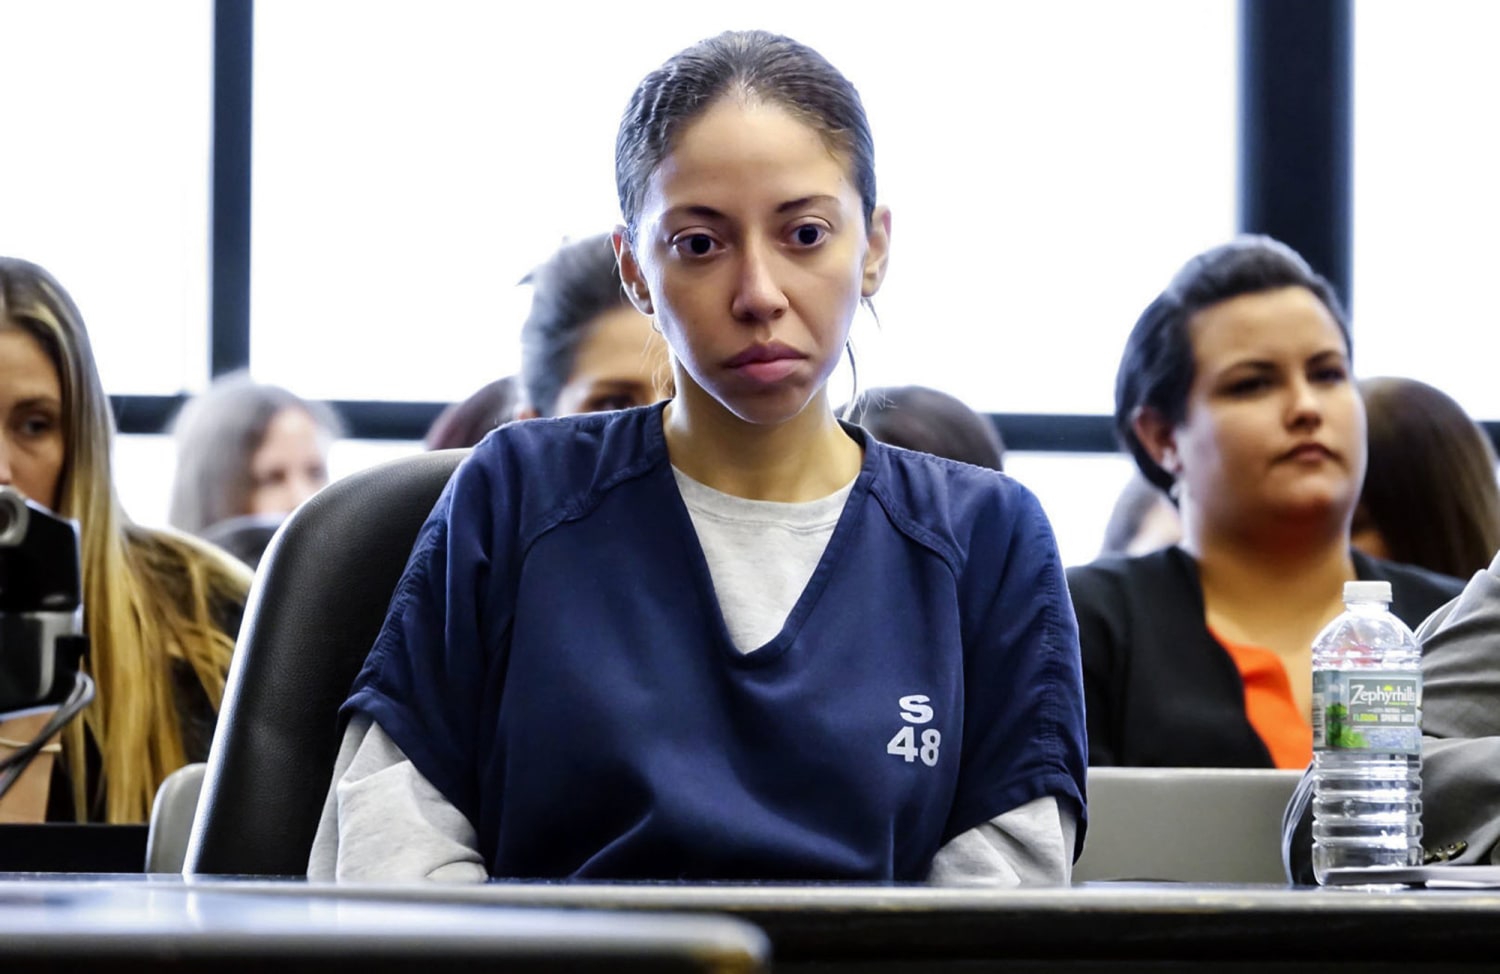 Ex-Escort Dalia Dippolito Gets 16 Years for Trying to Have Husband Killed